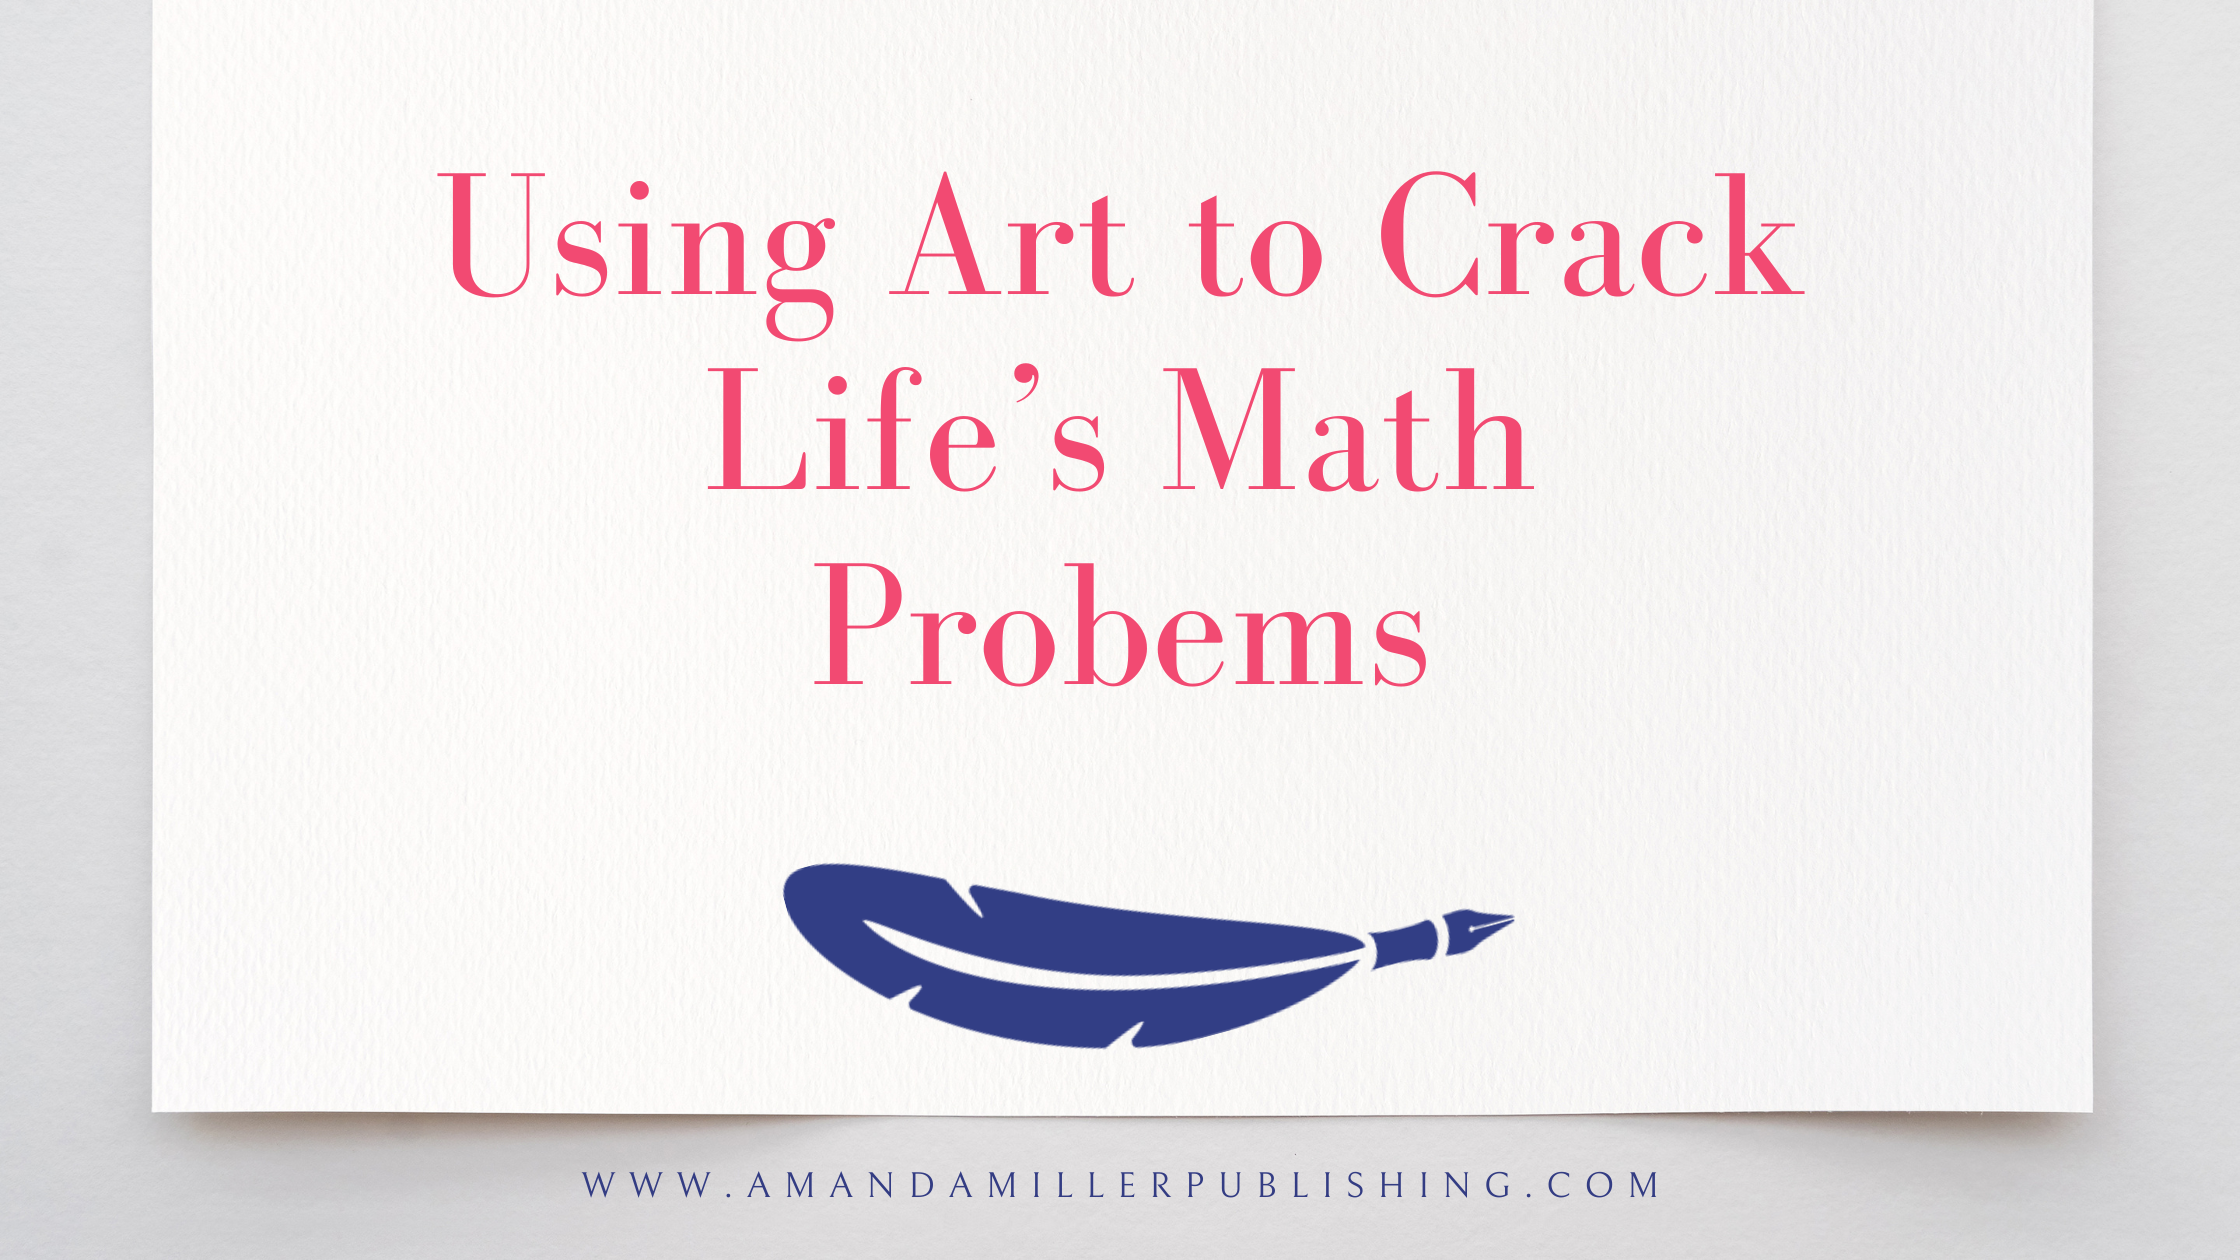 Using Art to Crack Life’s Math Problems